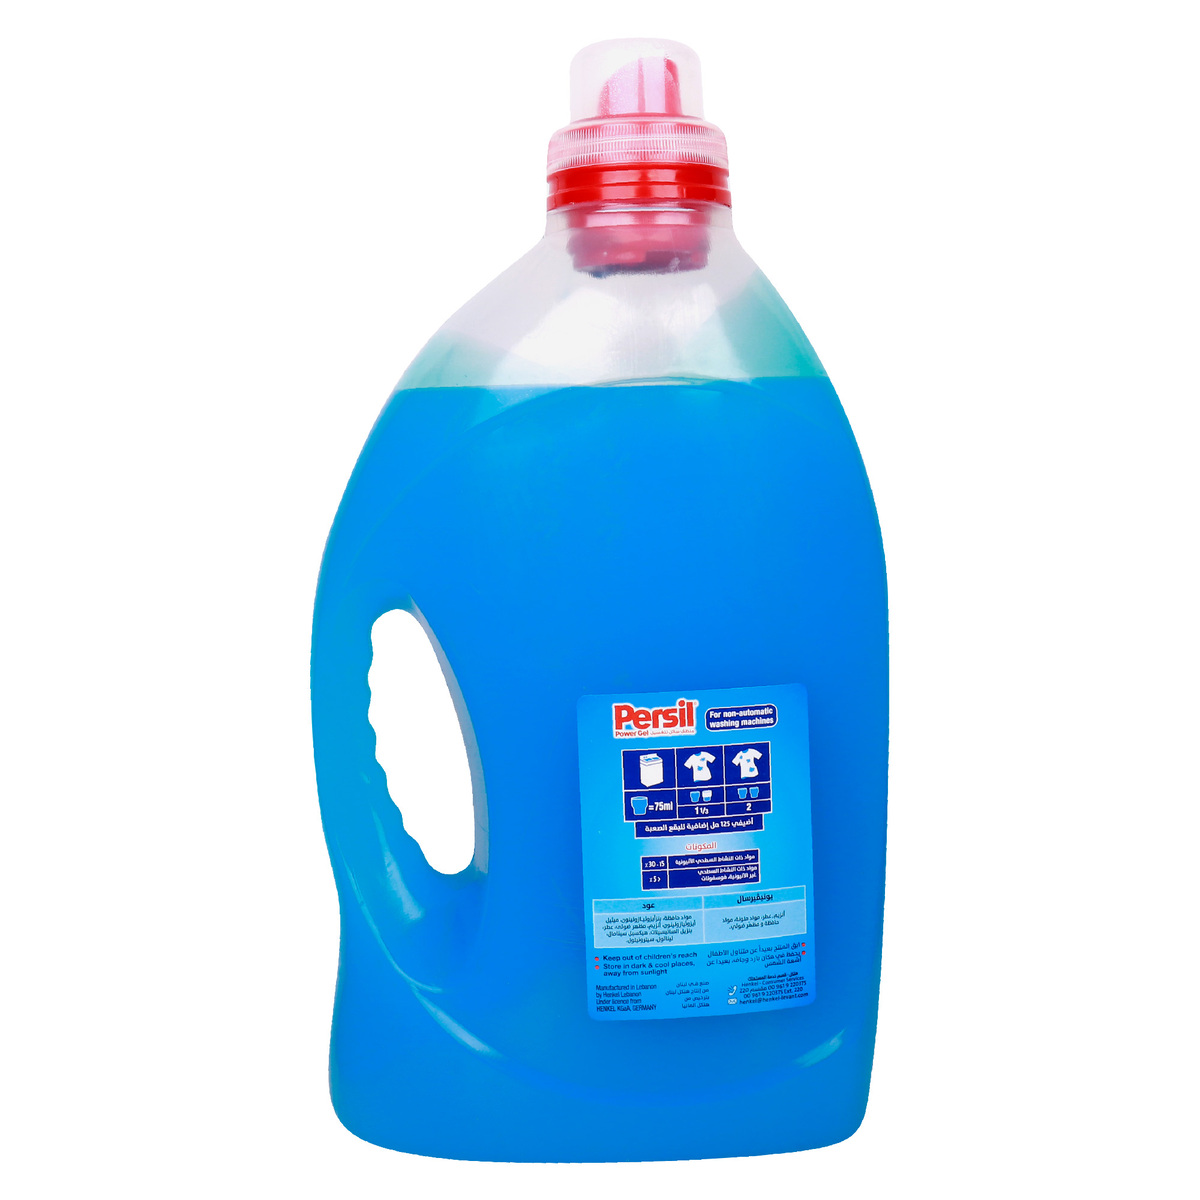 Persil Deep Clean Plus Power Gel With Oud Scent Value Pack 2.9 Litres